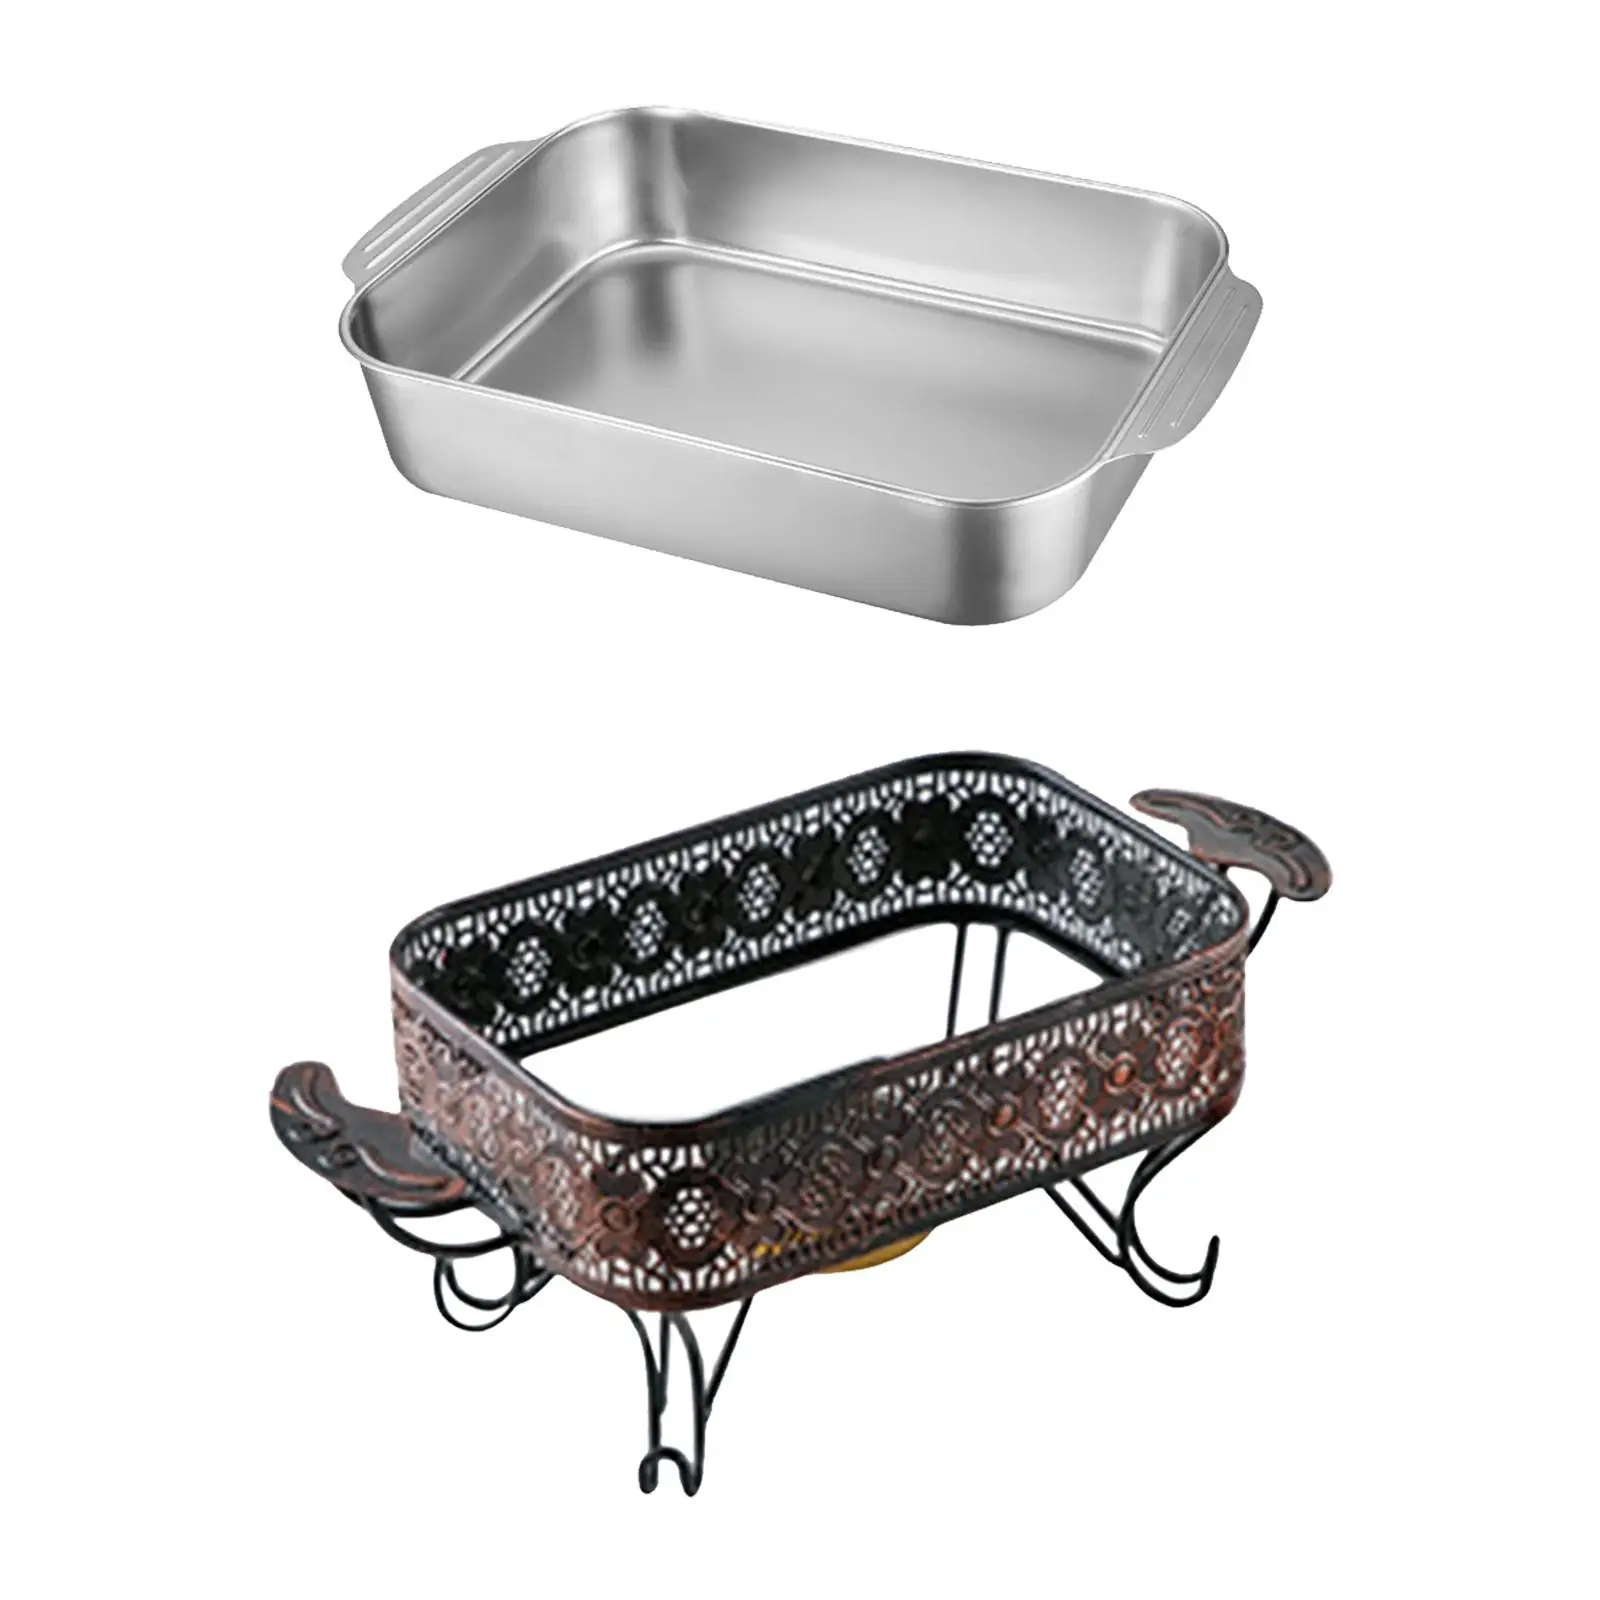 Roasting Pan with Handles Durable Rust Accessories Smooth Rolled Edges